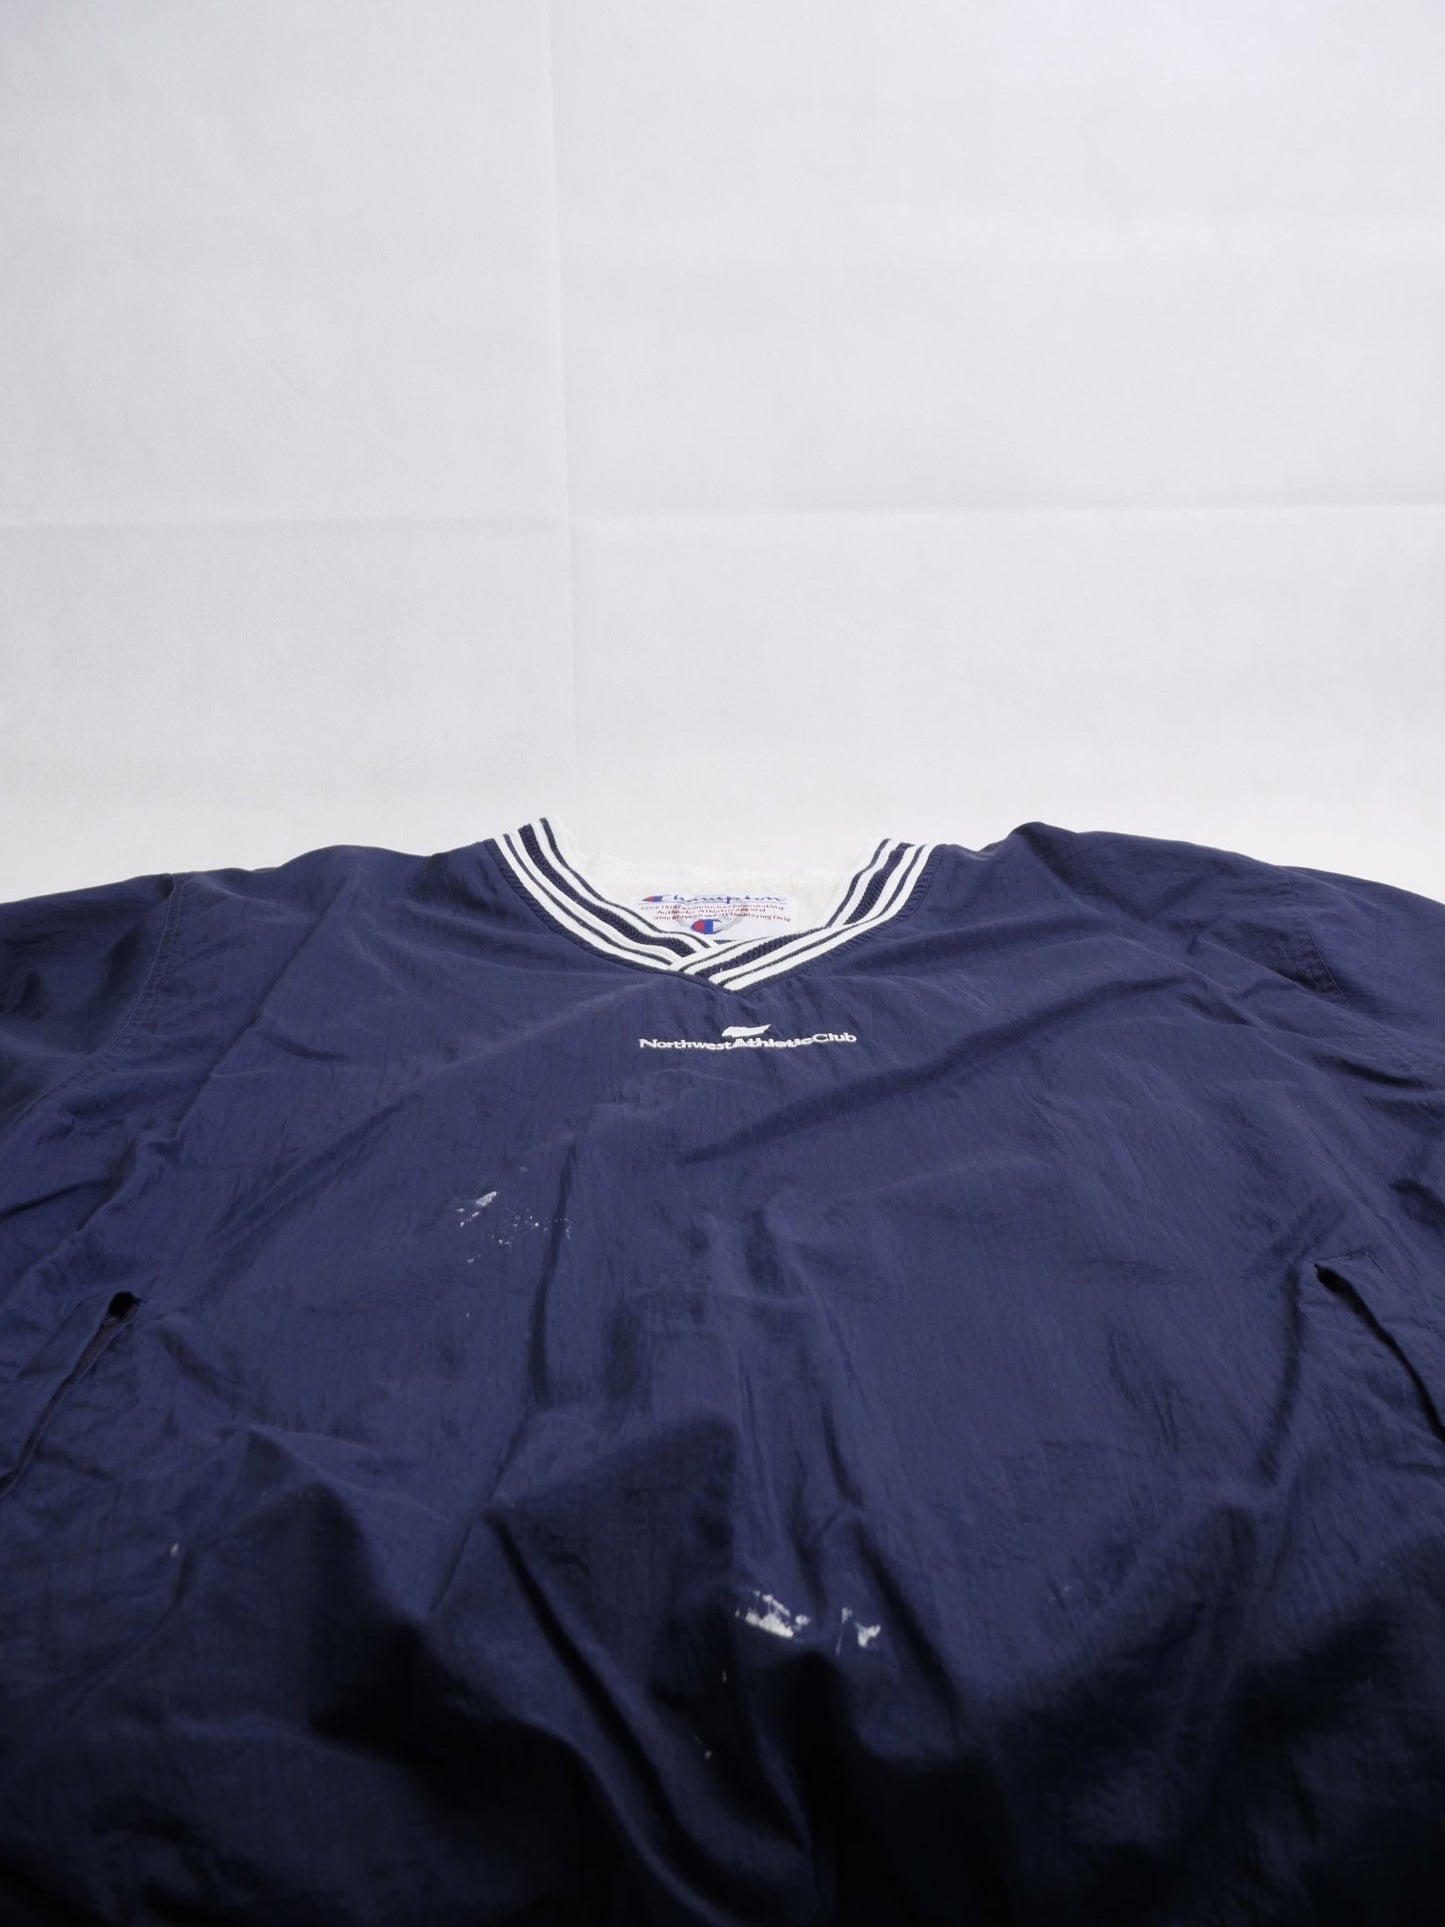 Champion embroidered Logo 'Northwest Athletic Club' navy Jersey Sweater - Peeces